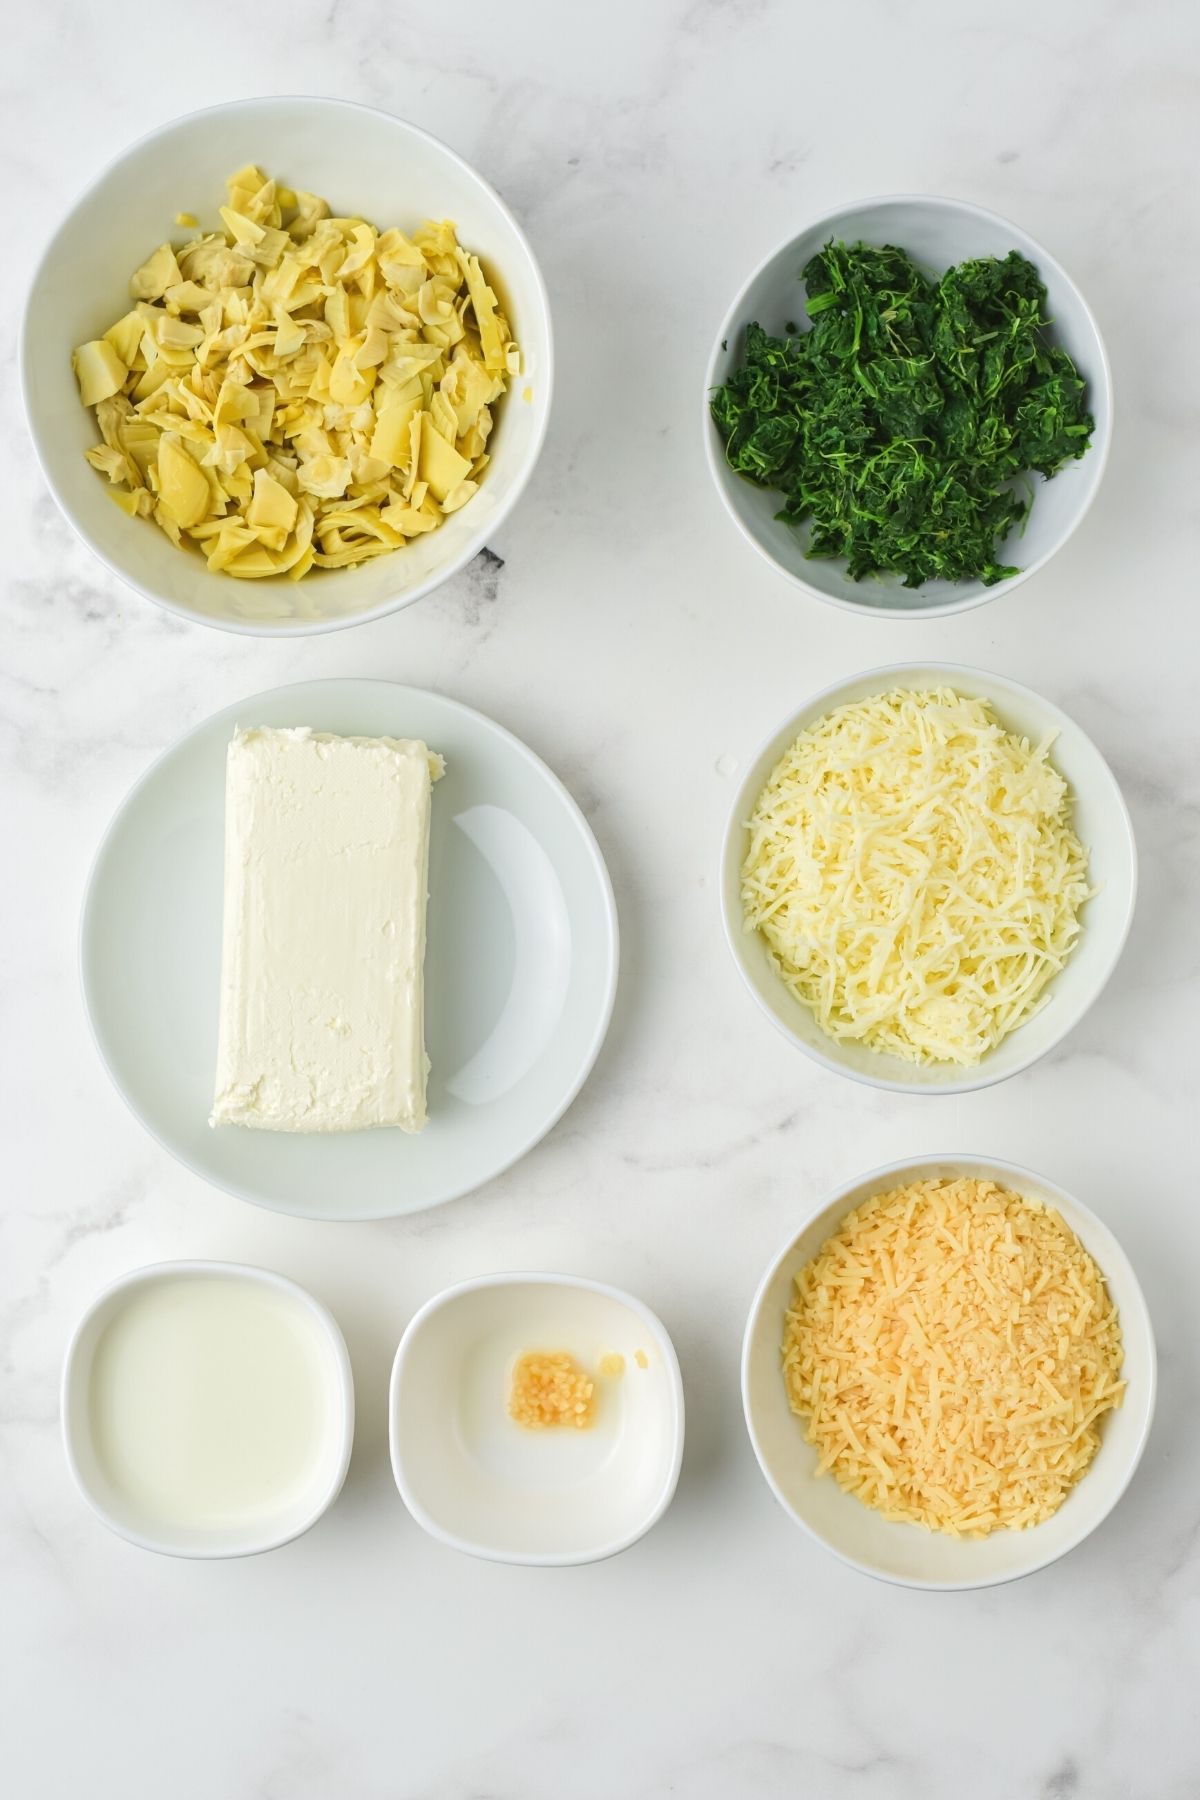 ingredients in white bowls on counter: drained artichokes, frozen spinach, block of cream cheese, shredded mozzarella, parmesan cheese, milk, garlic